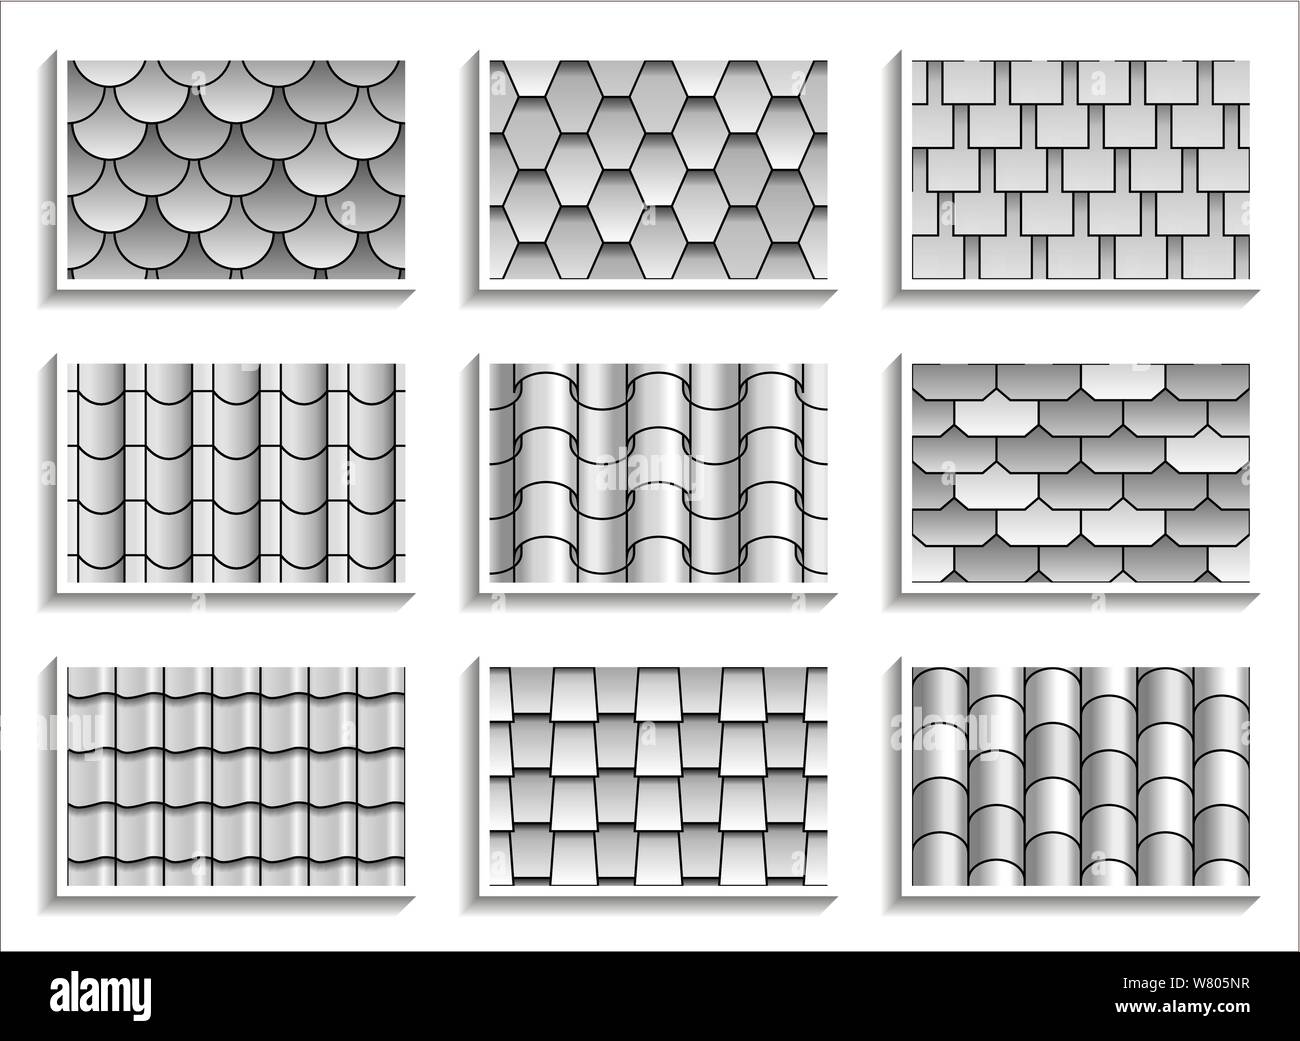 Set of grayscale seamless roof tiles textures. Black-and-white graphic patterns of rooftop materials Stock Vector